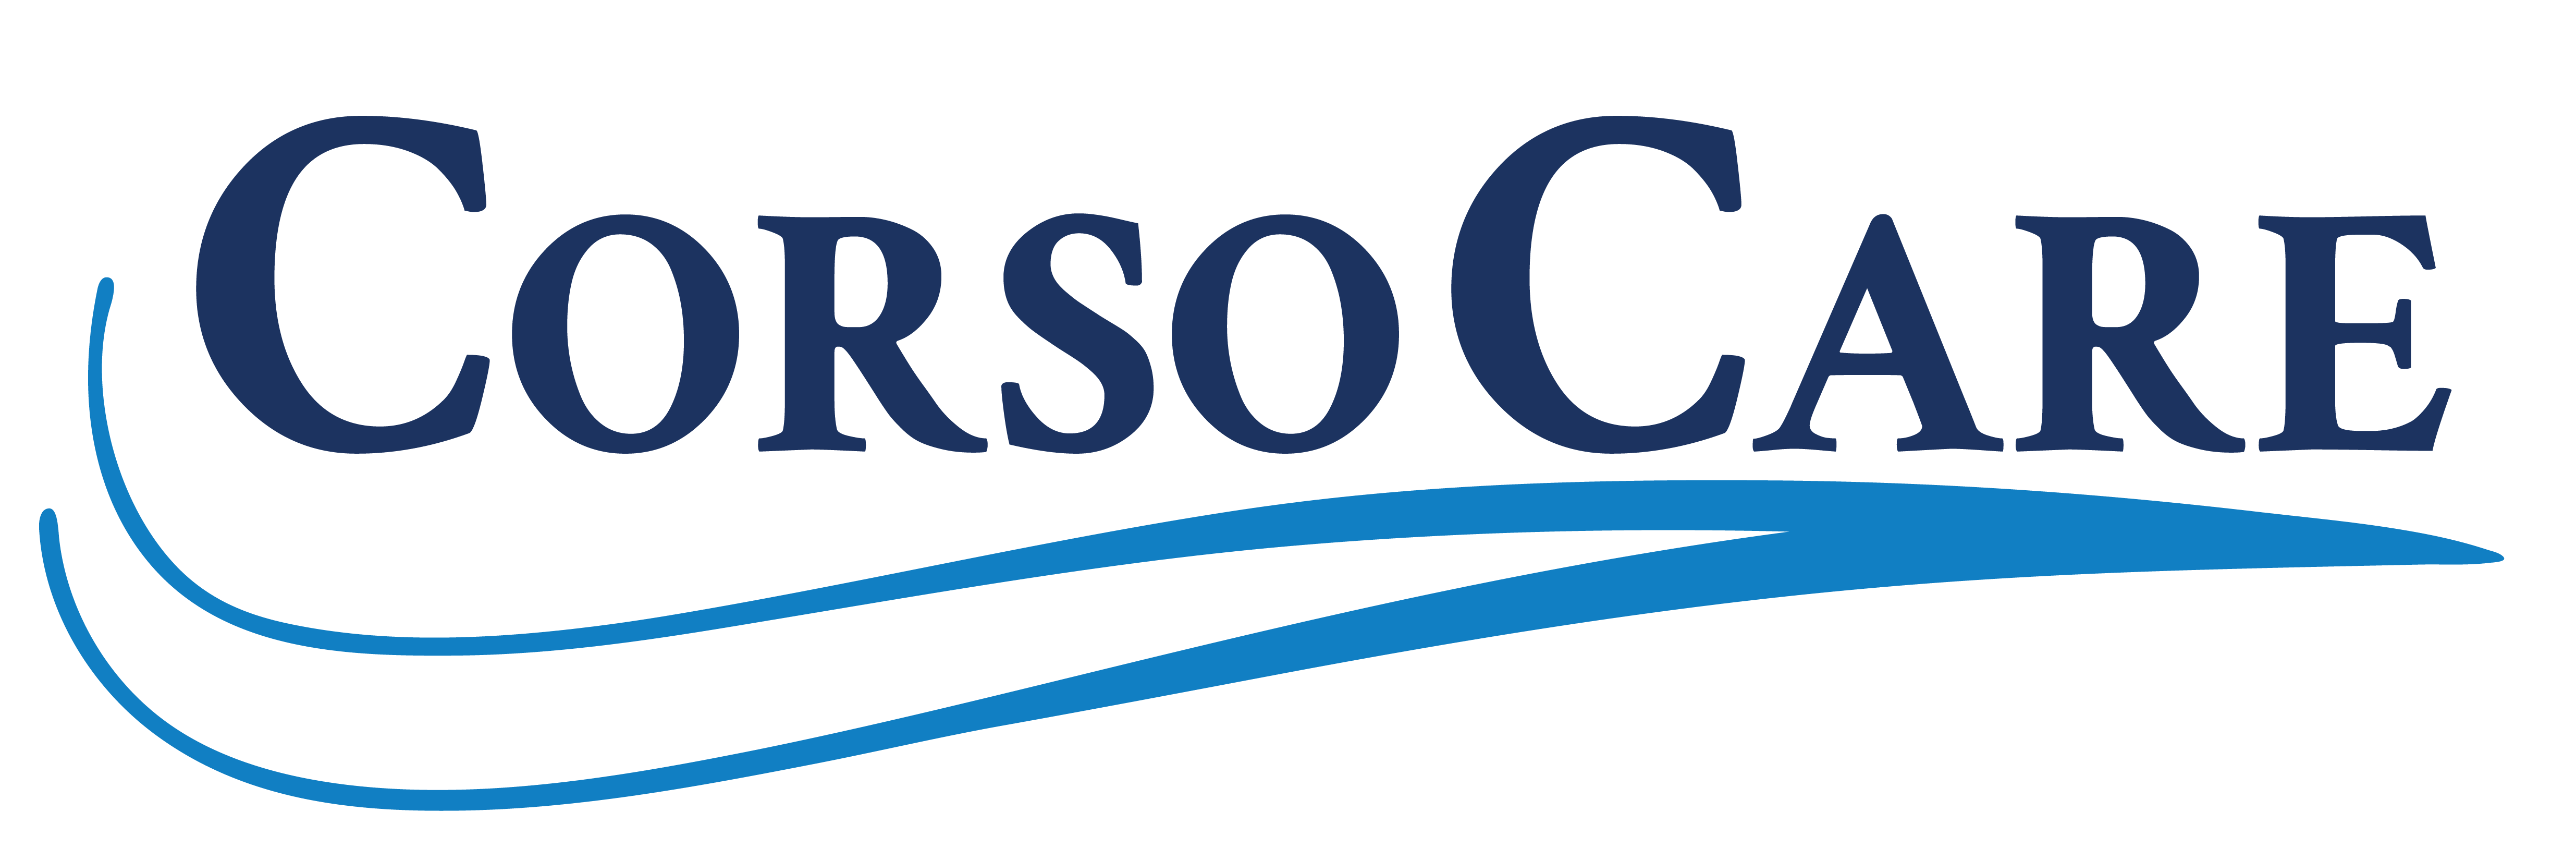 CorsoCare Personal Care - Clinton Township at Troy, MI